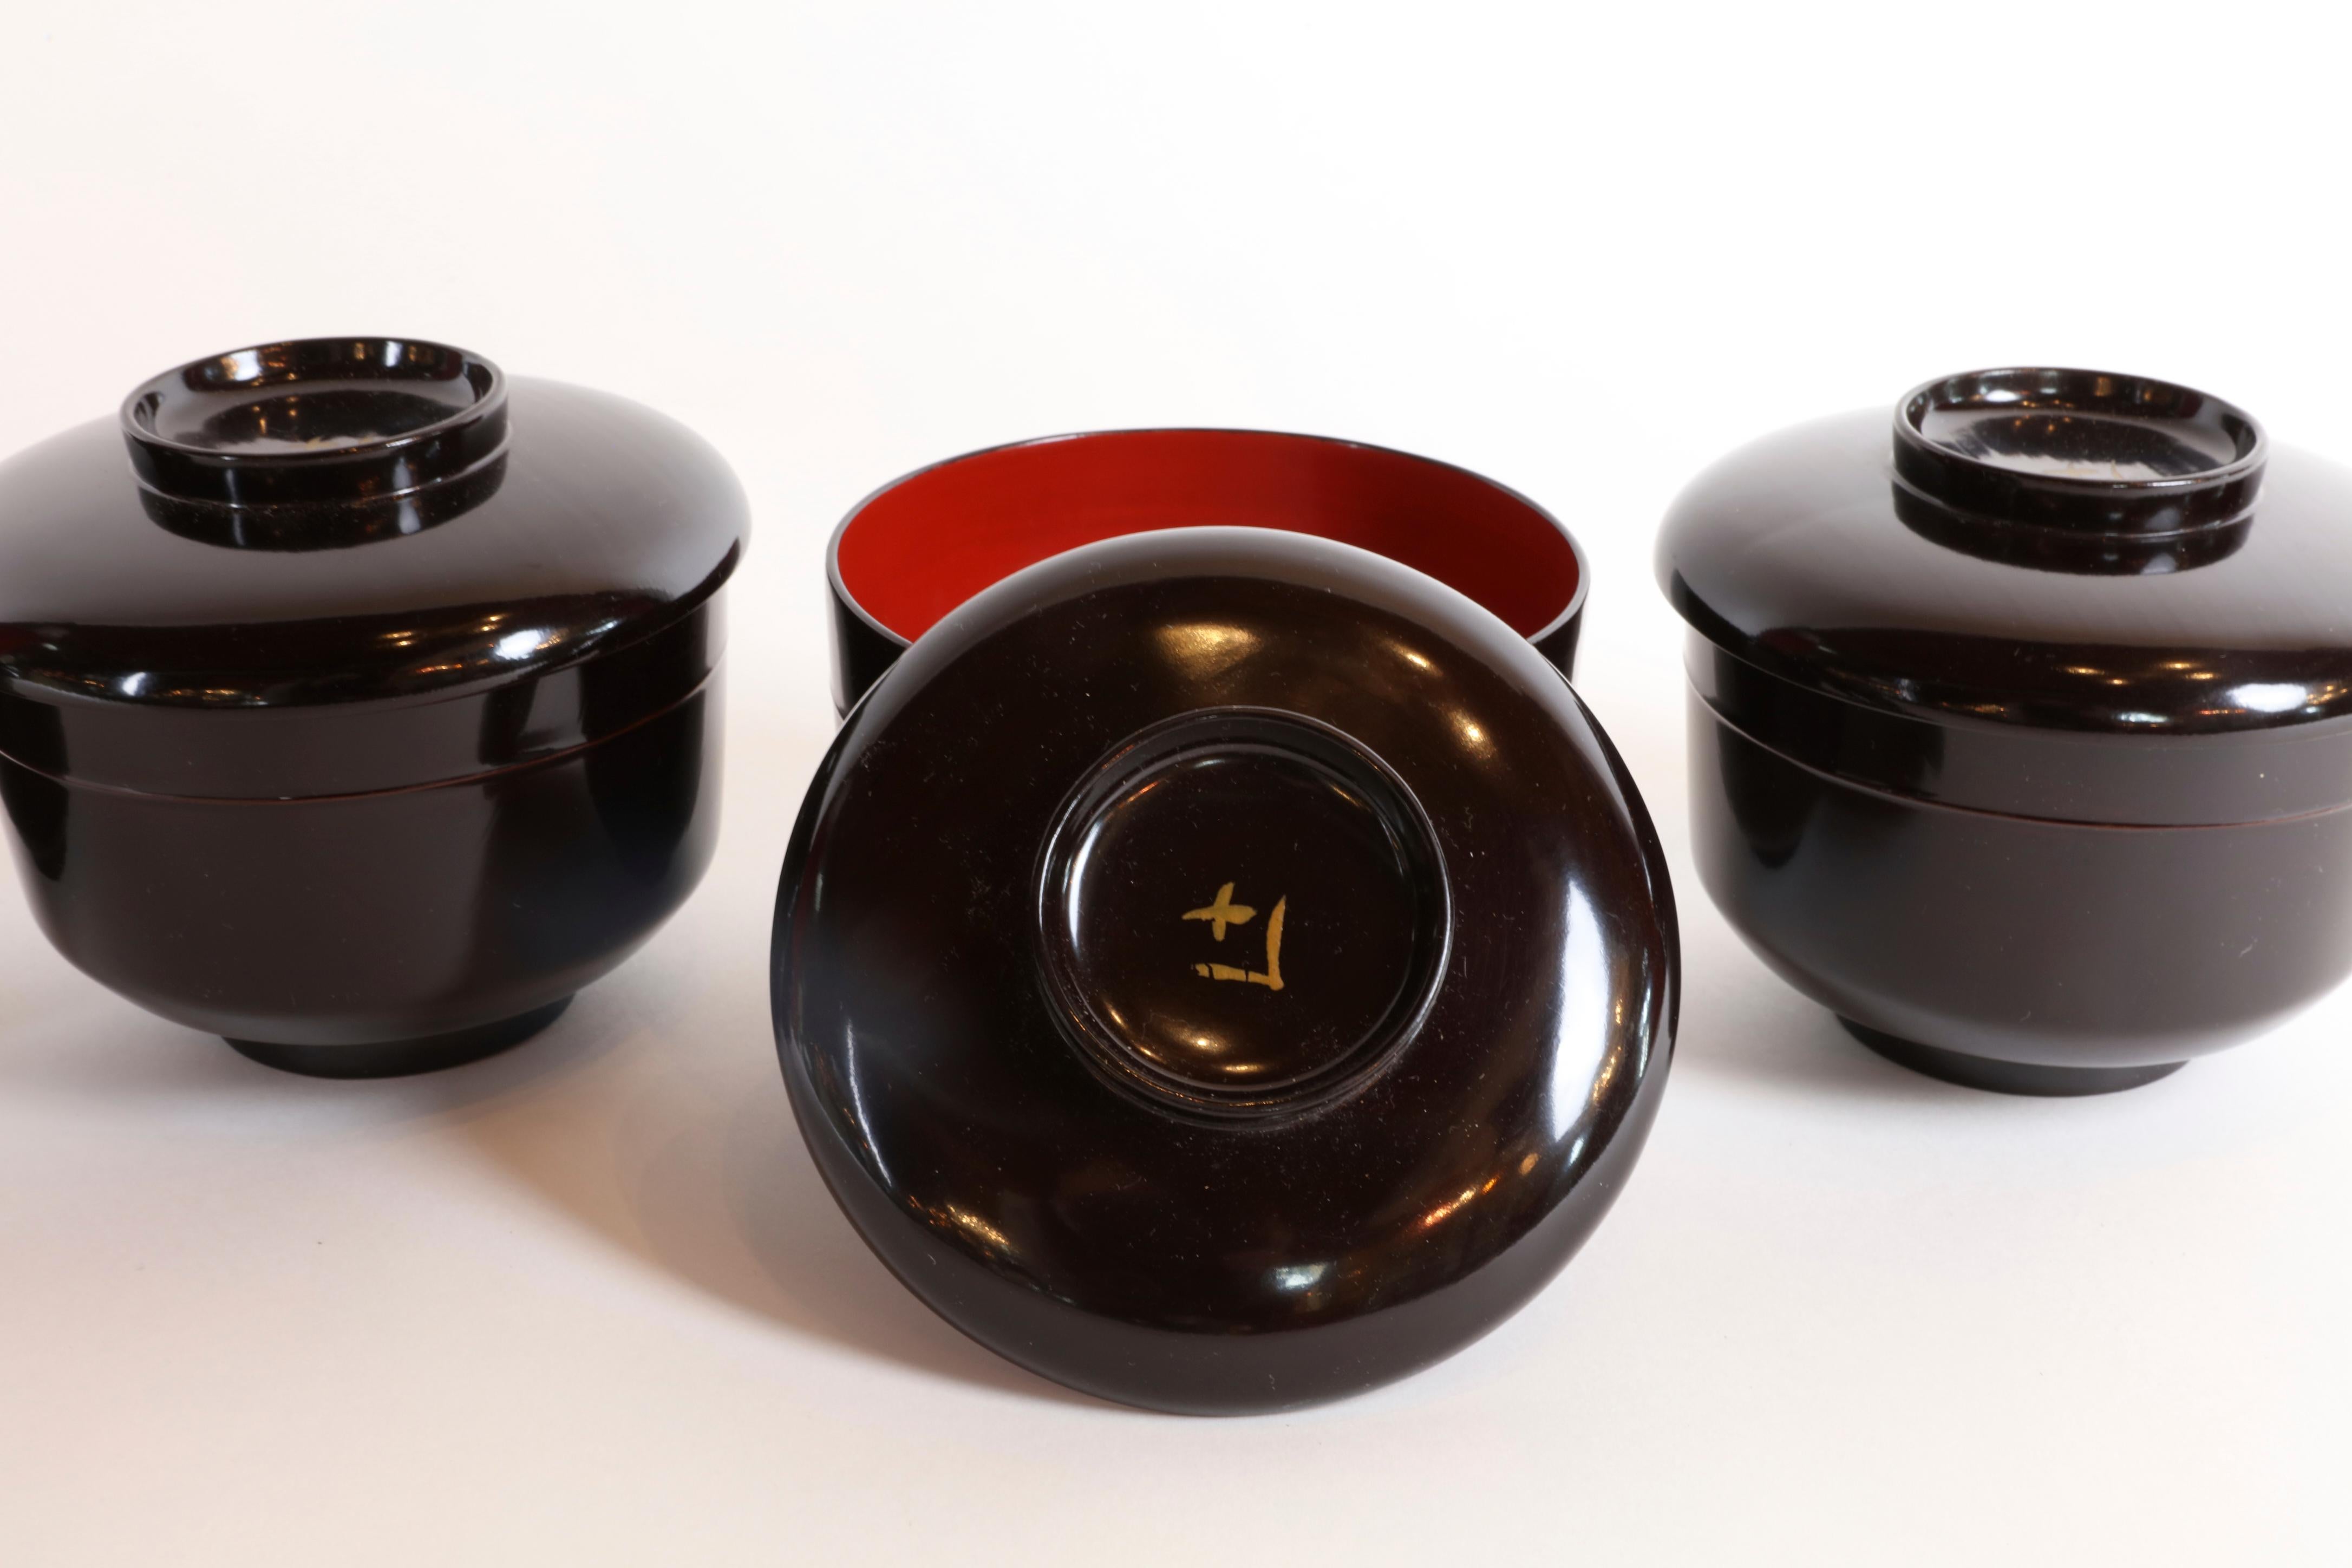 Set of 4 lacquered miso soup bowls

Measures: 3.5